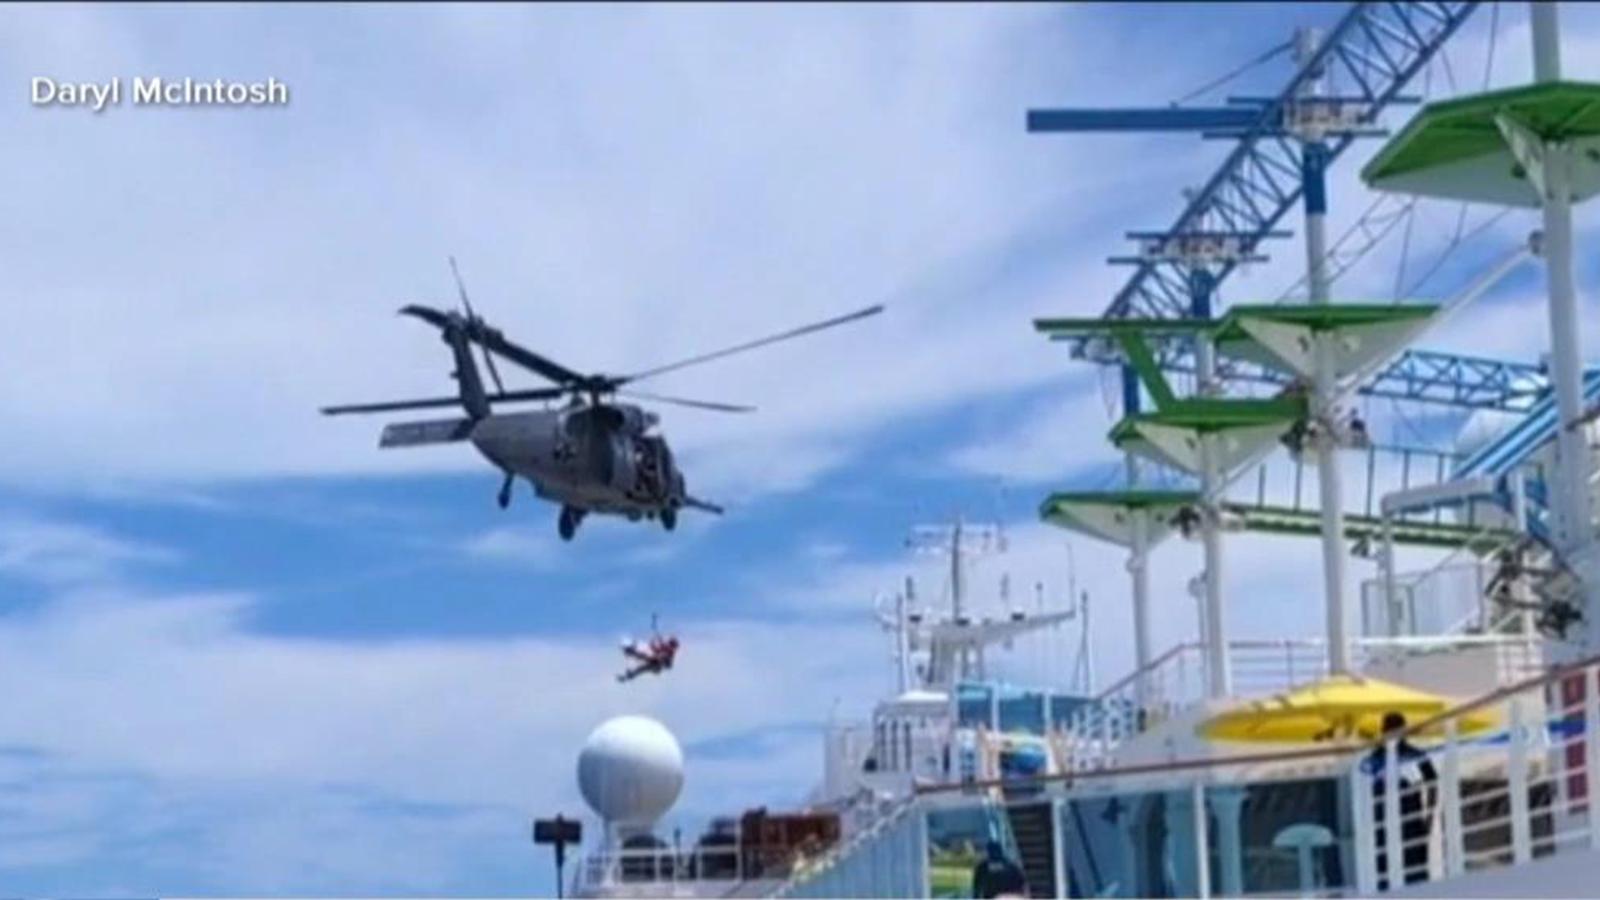 The Air Force rescued a boy from a cruise ship